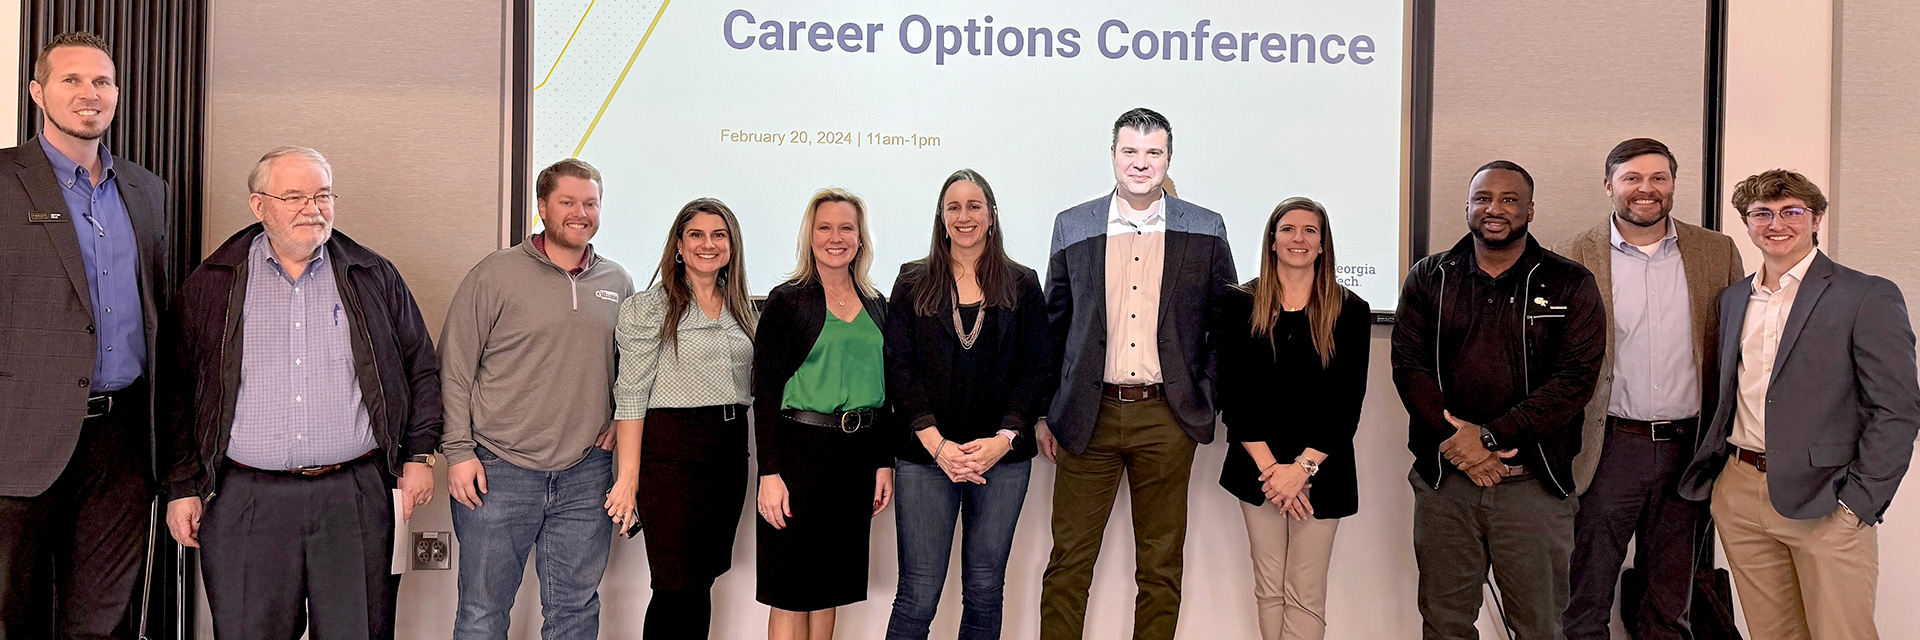 Corporate friends of the School of Building Construction pose for a photo in front of a projection screen that reads "Career Options Conference."